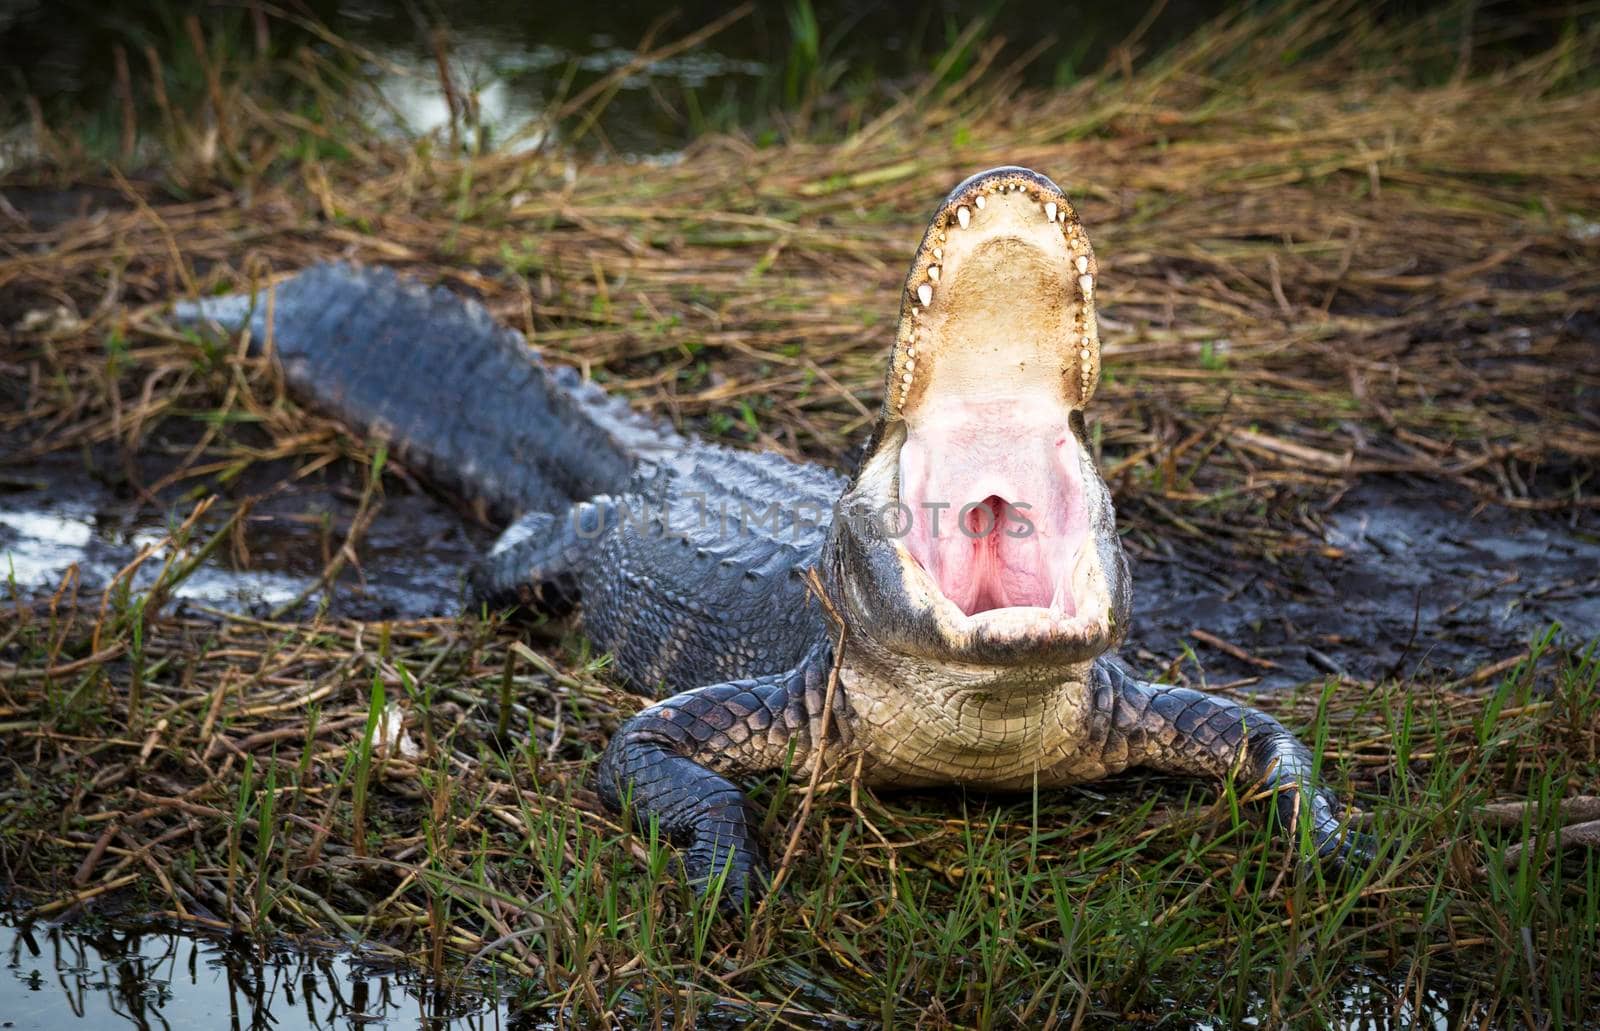 A crocodile opening its mouth, crocodile in the grass opening its whole mouth by isaiphoto